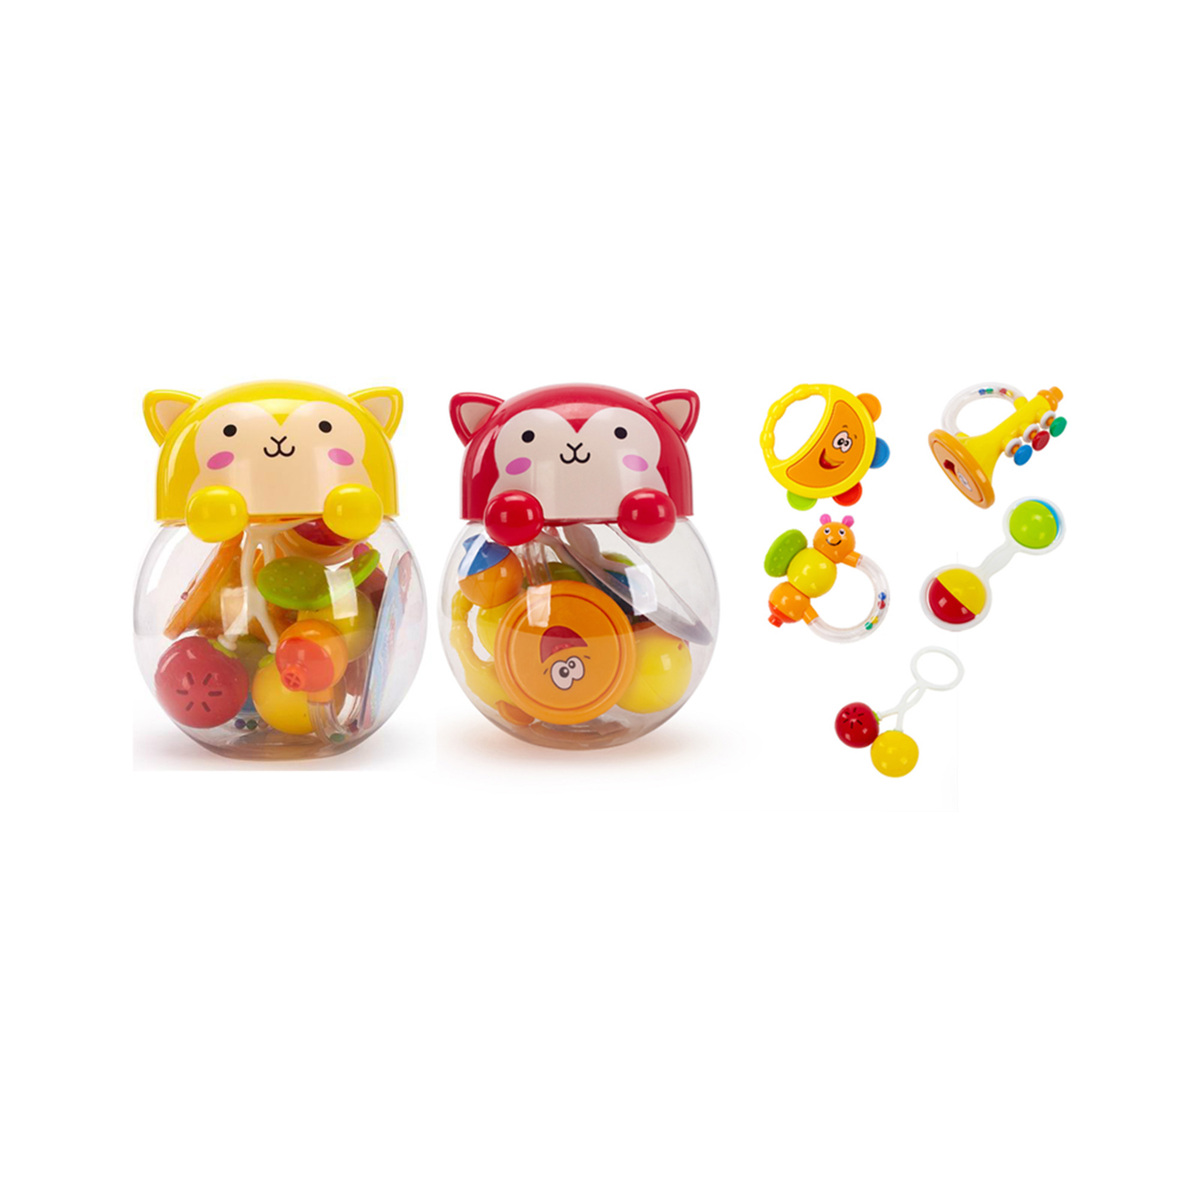 First Step Baby Rattle 6505 5Pcs Set - Assorted Designs - 1 Set